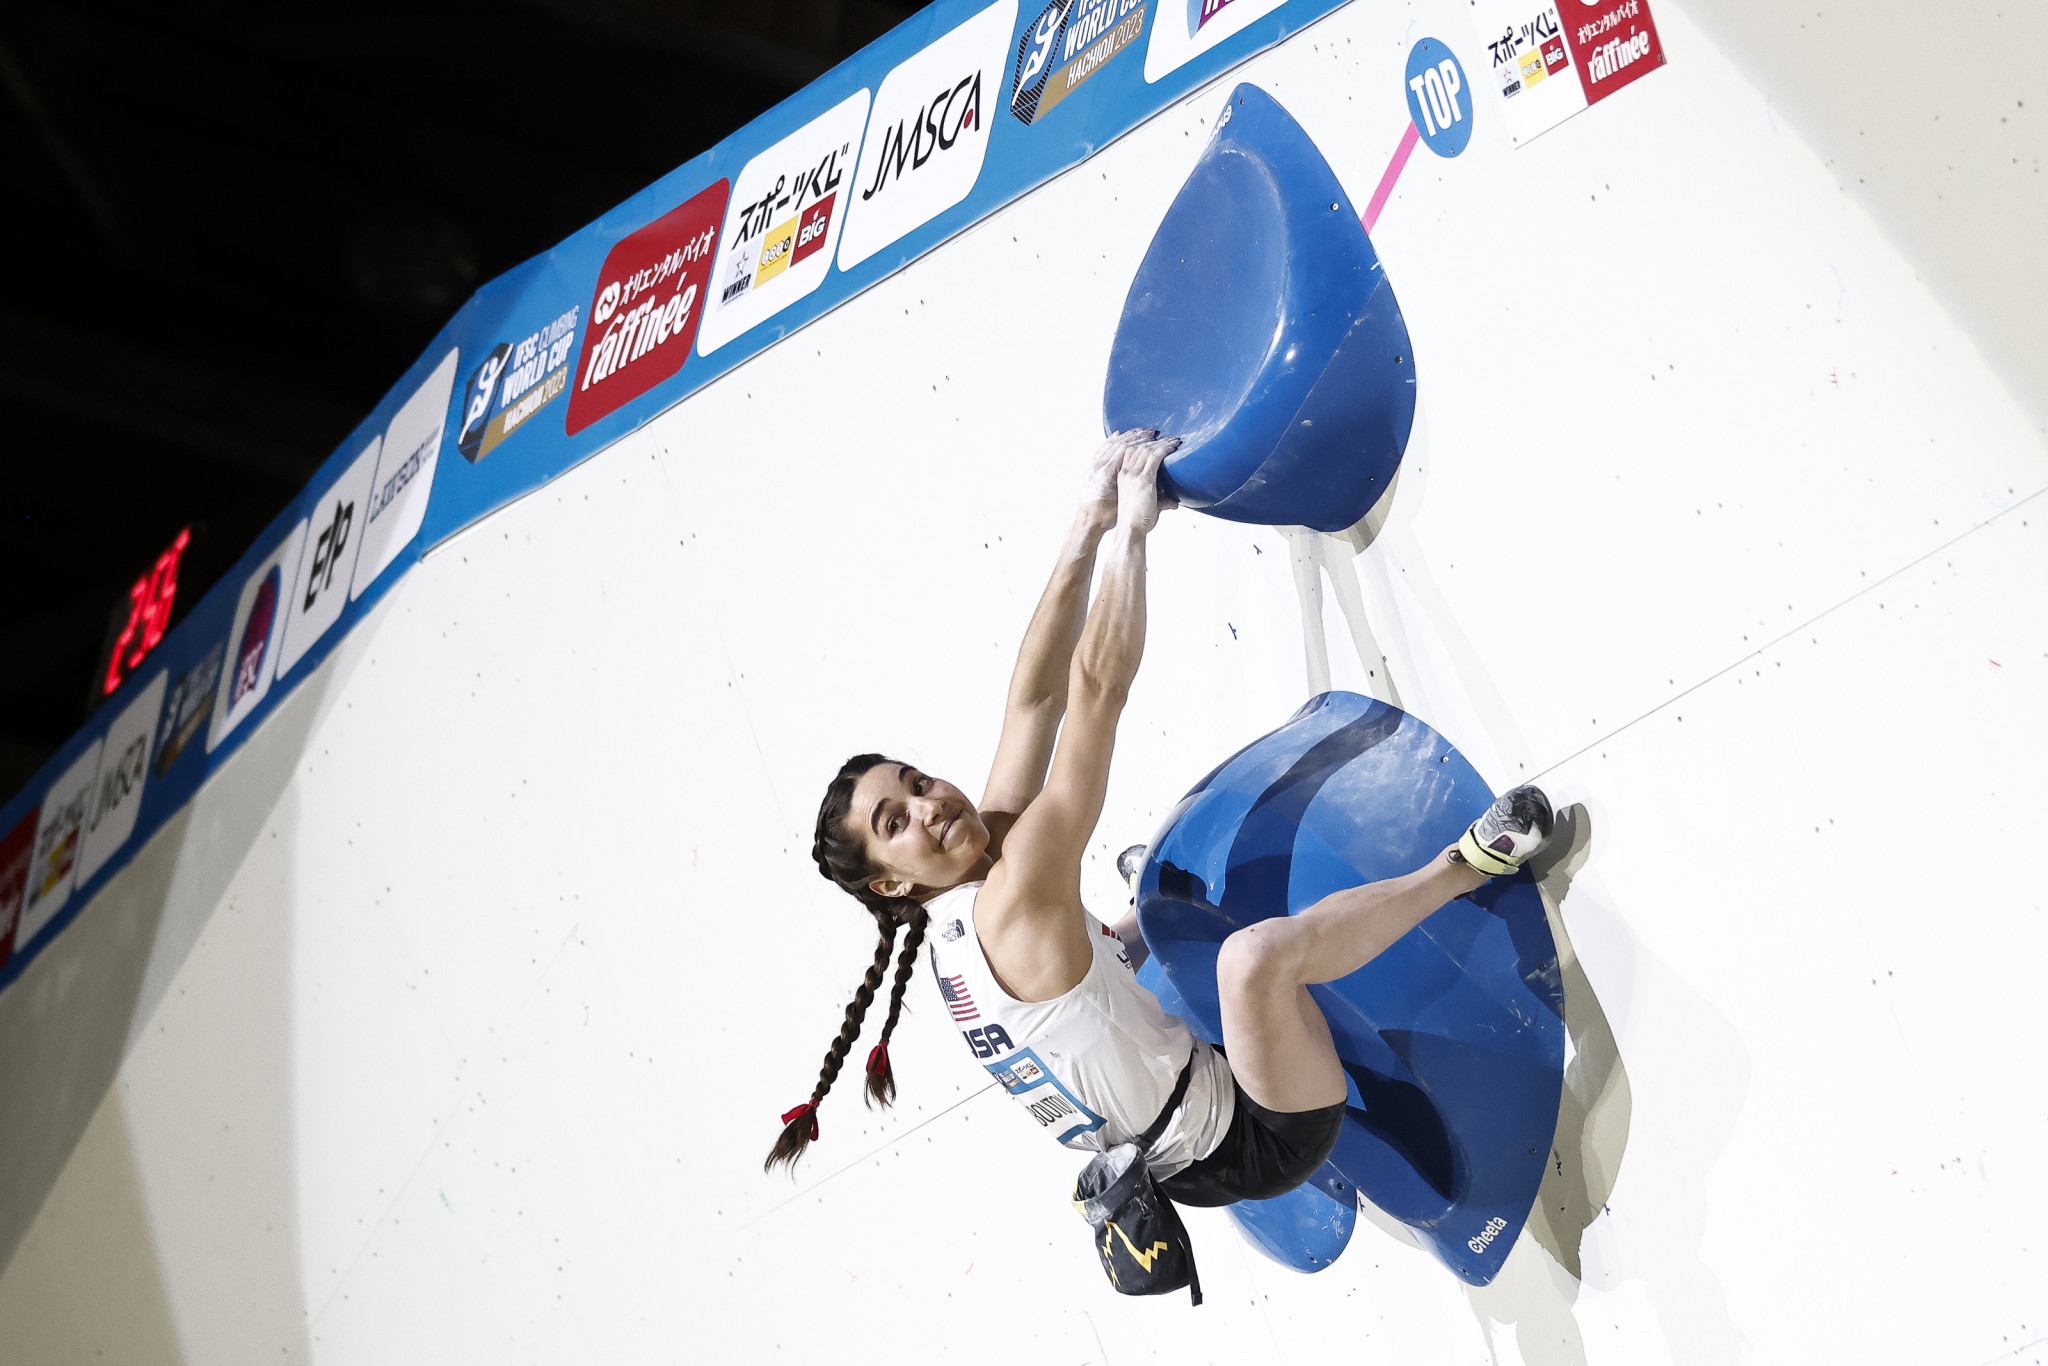 Brooke Raboutou of the US earned her first women's boulder IFSC World Cup victory in Hachioji ©Dimitris Tosidis/IFSC